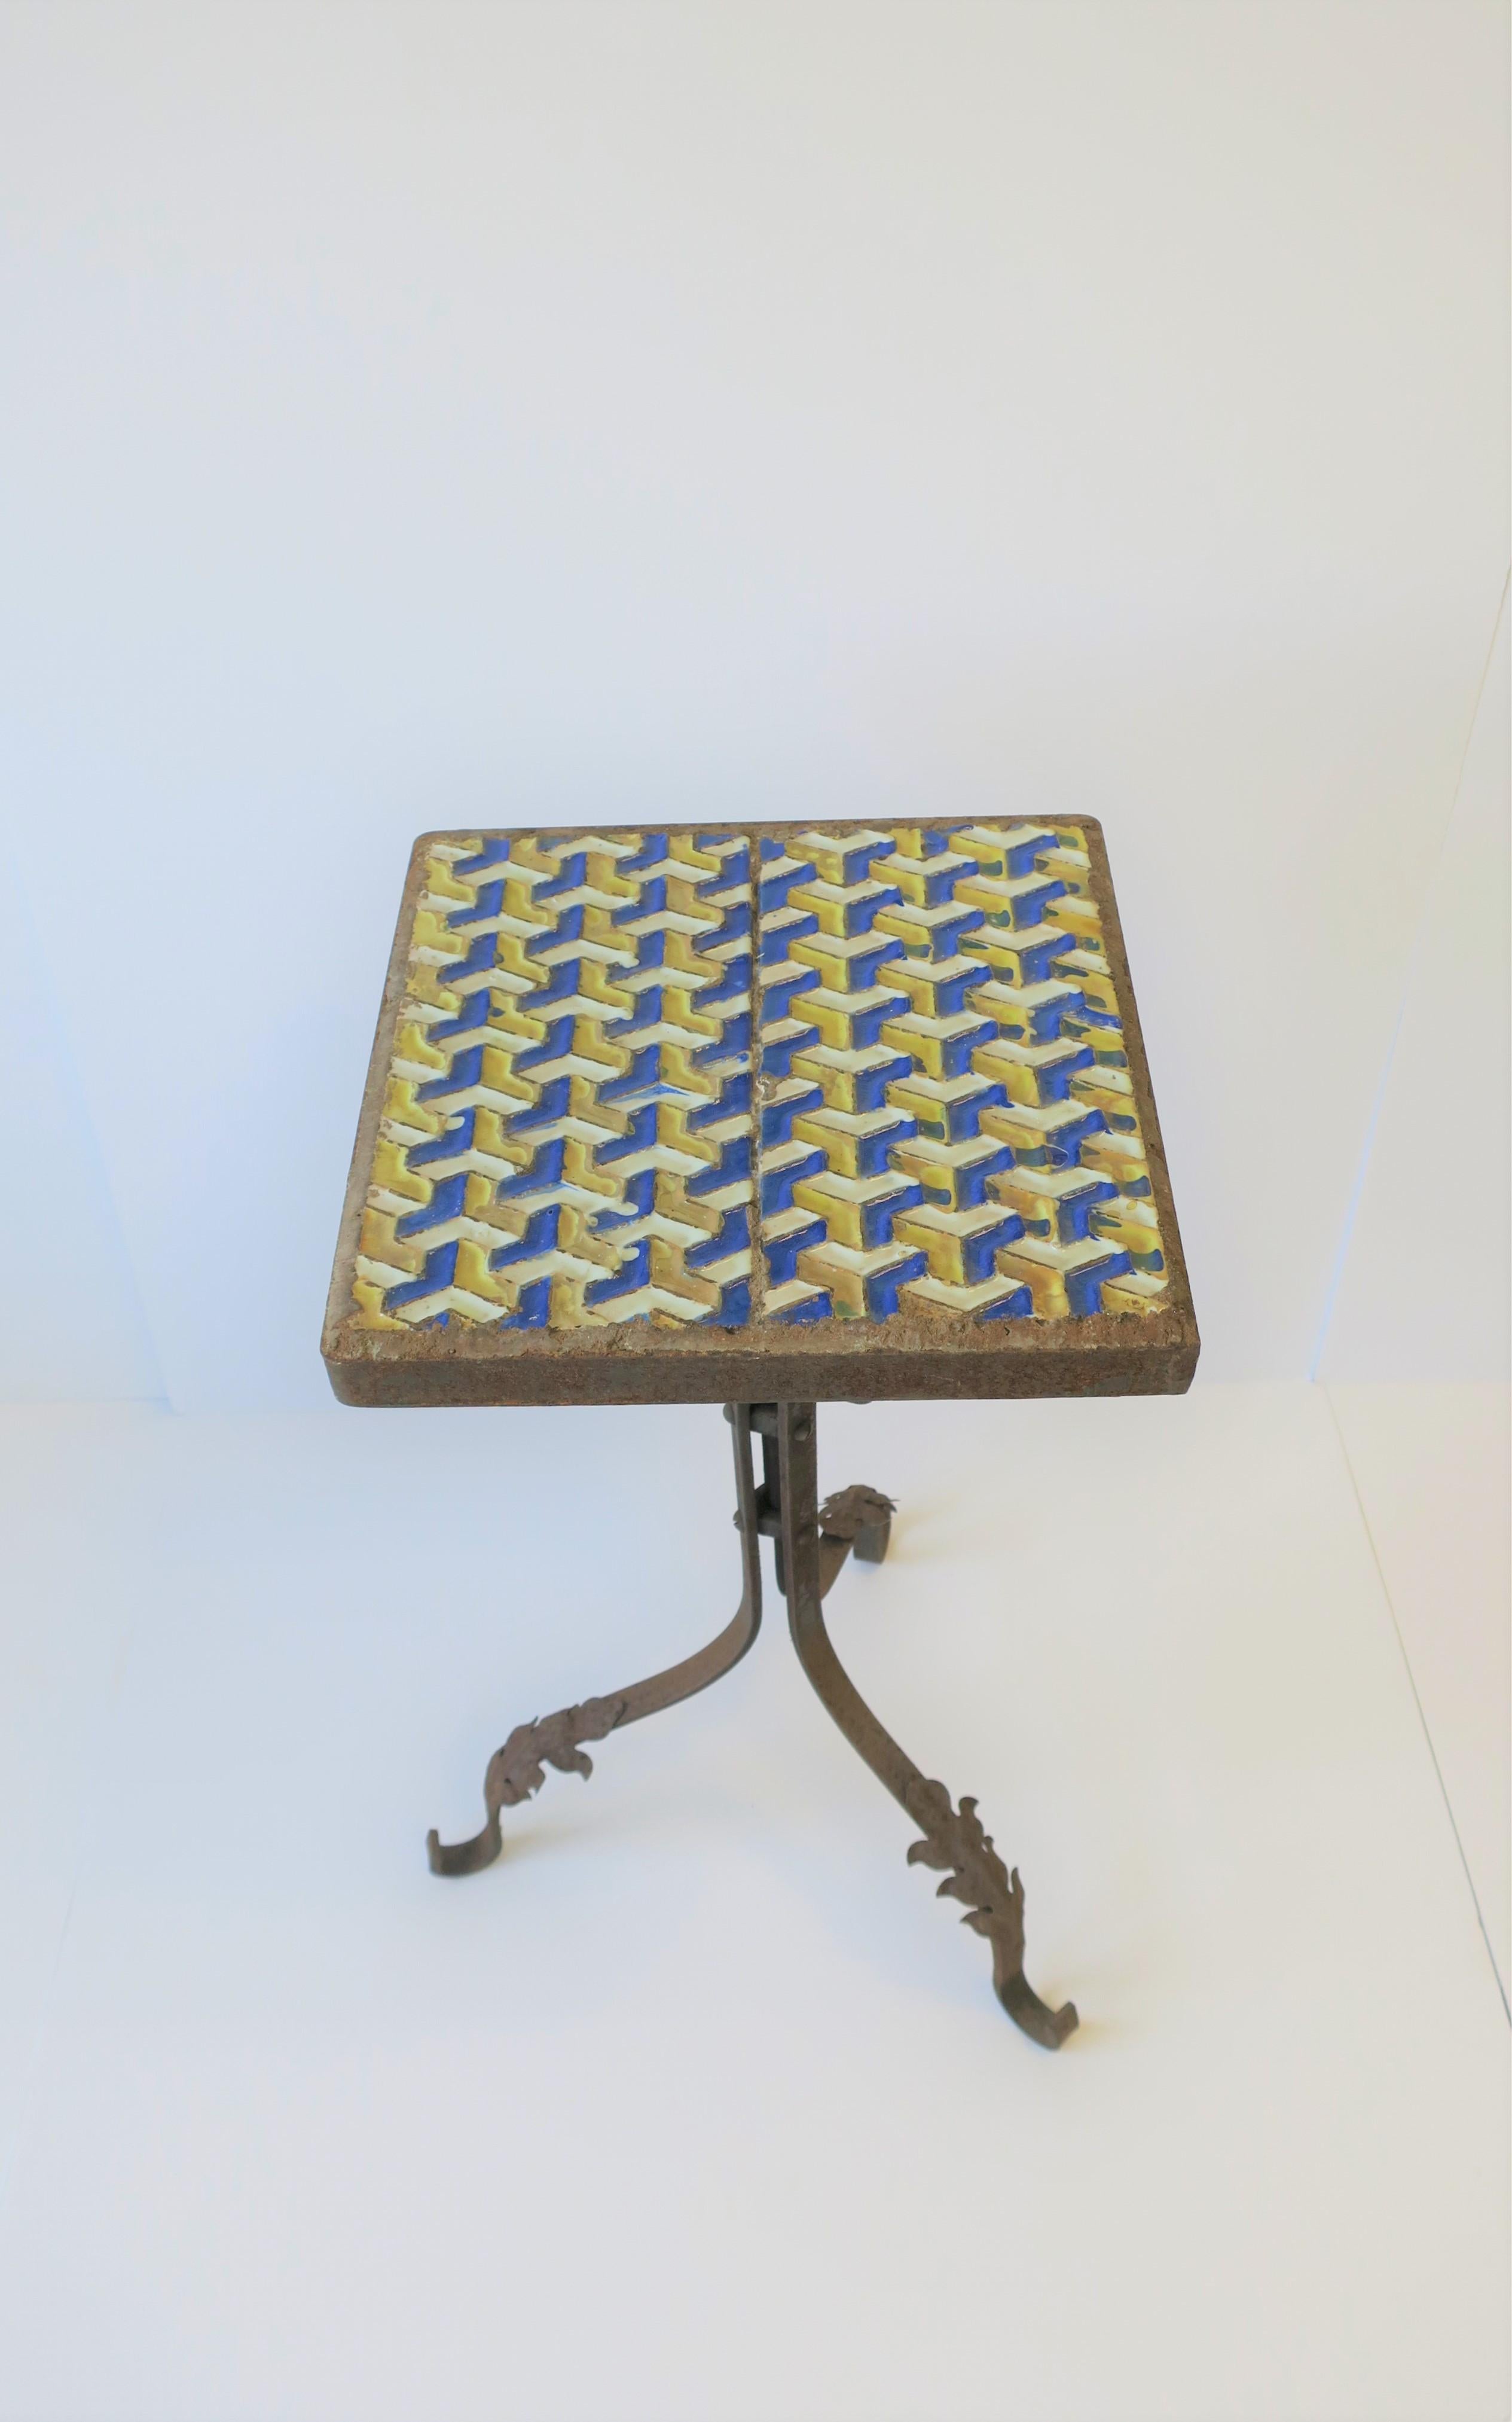 20th Century Midcentury Outdoor Patio Side Table with Geometric Ceramic Top